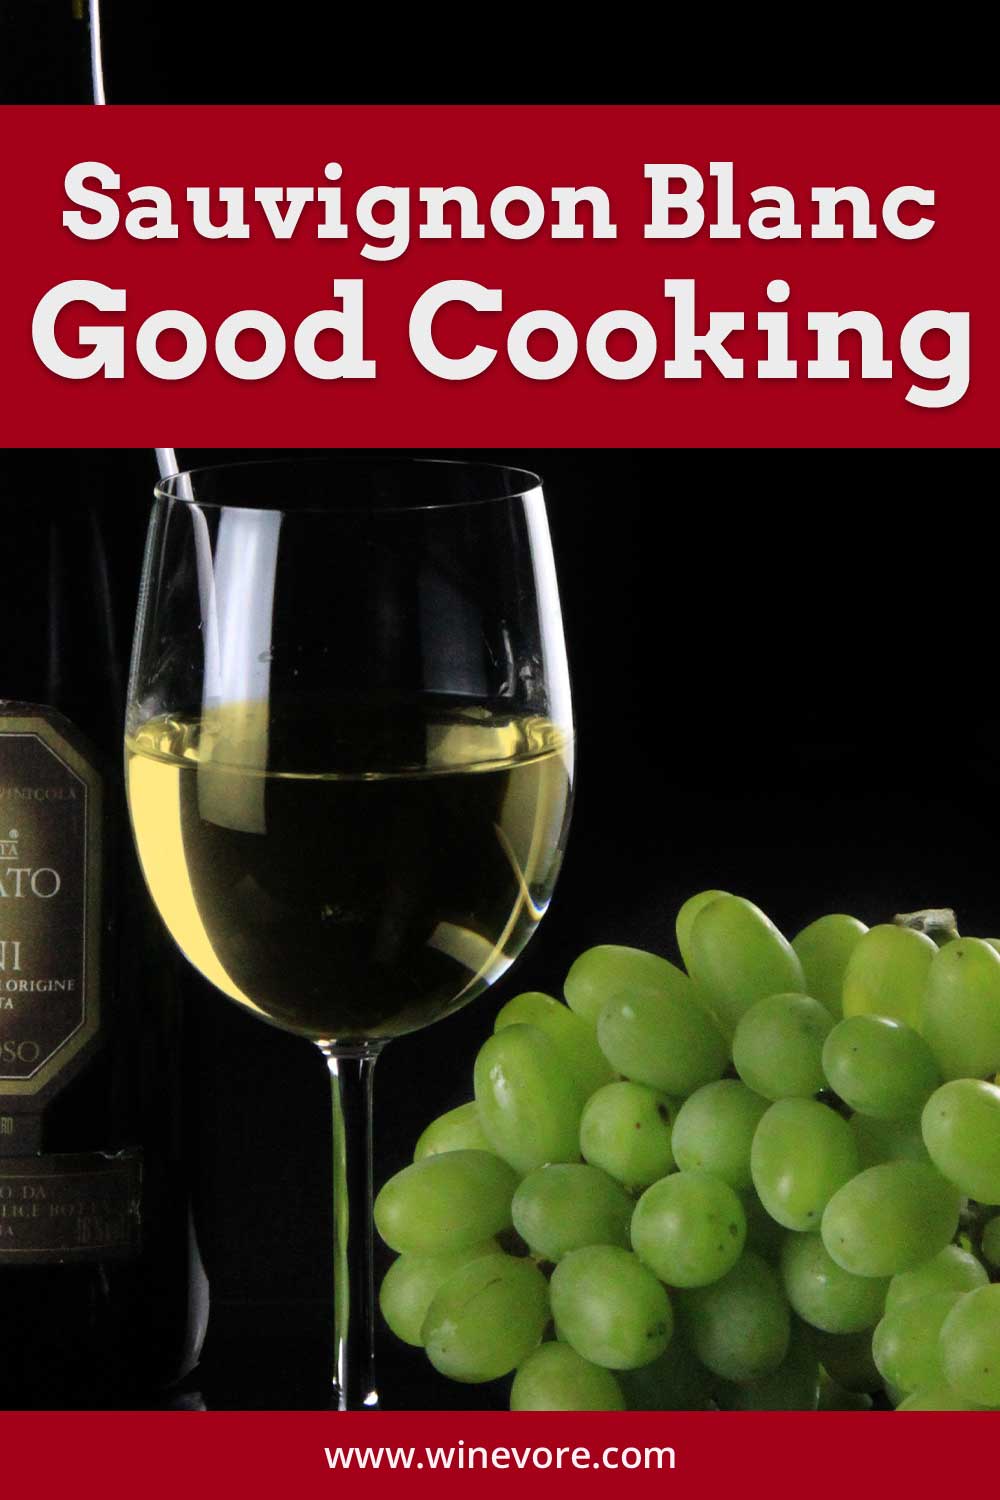 A glass of wine and ripe grapes in front of a dark bottle- Sauvignon Blanc Good Cooking.